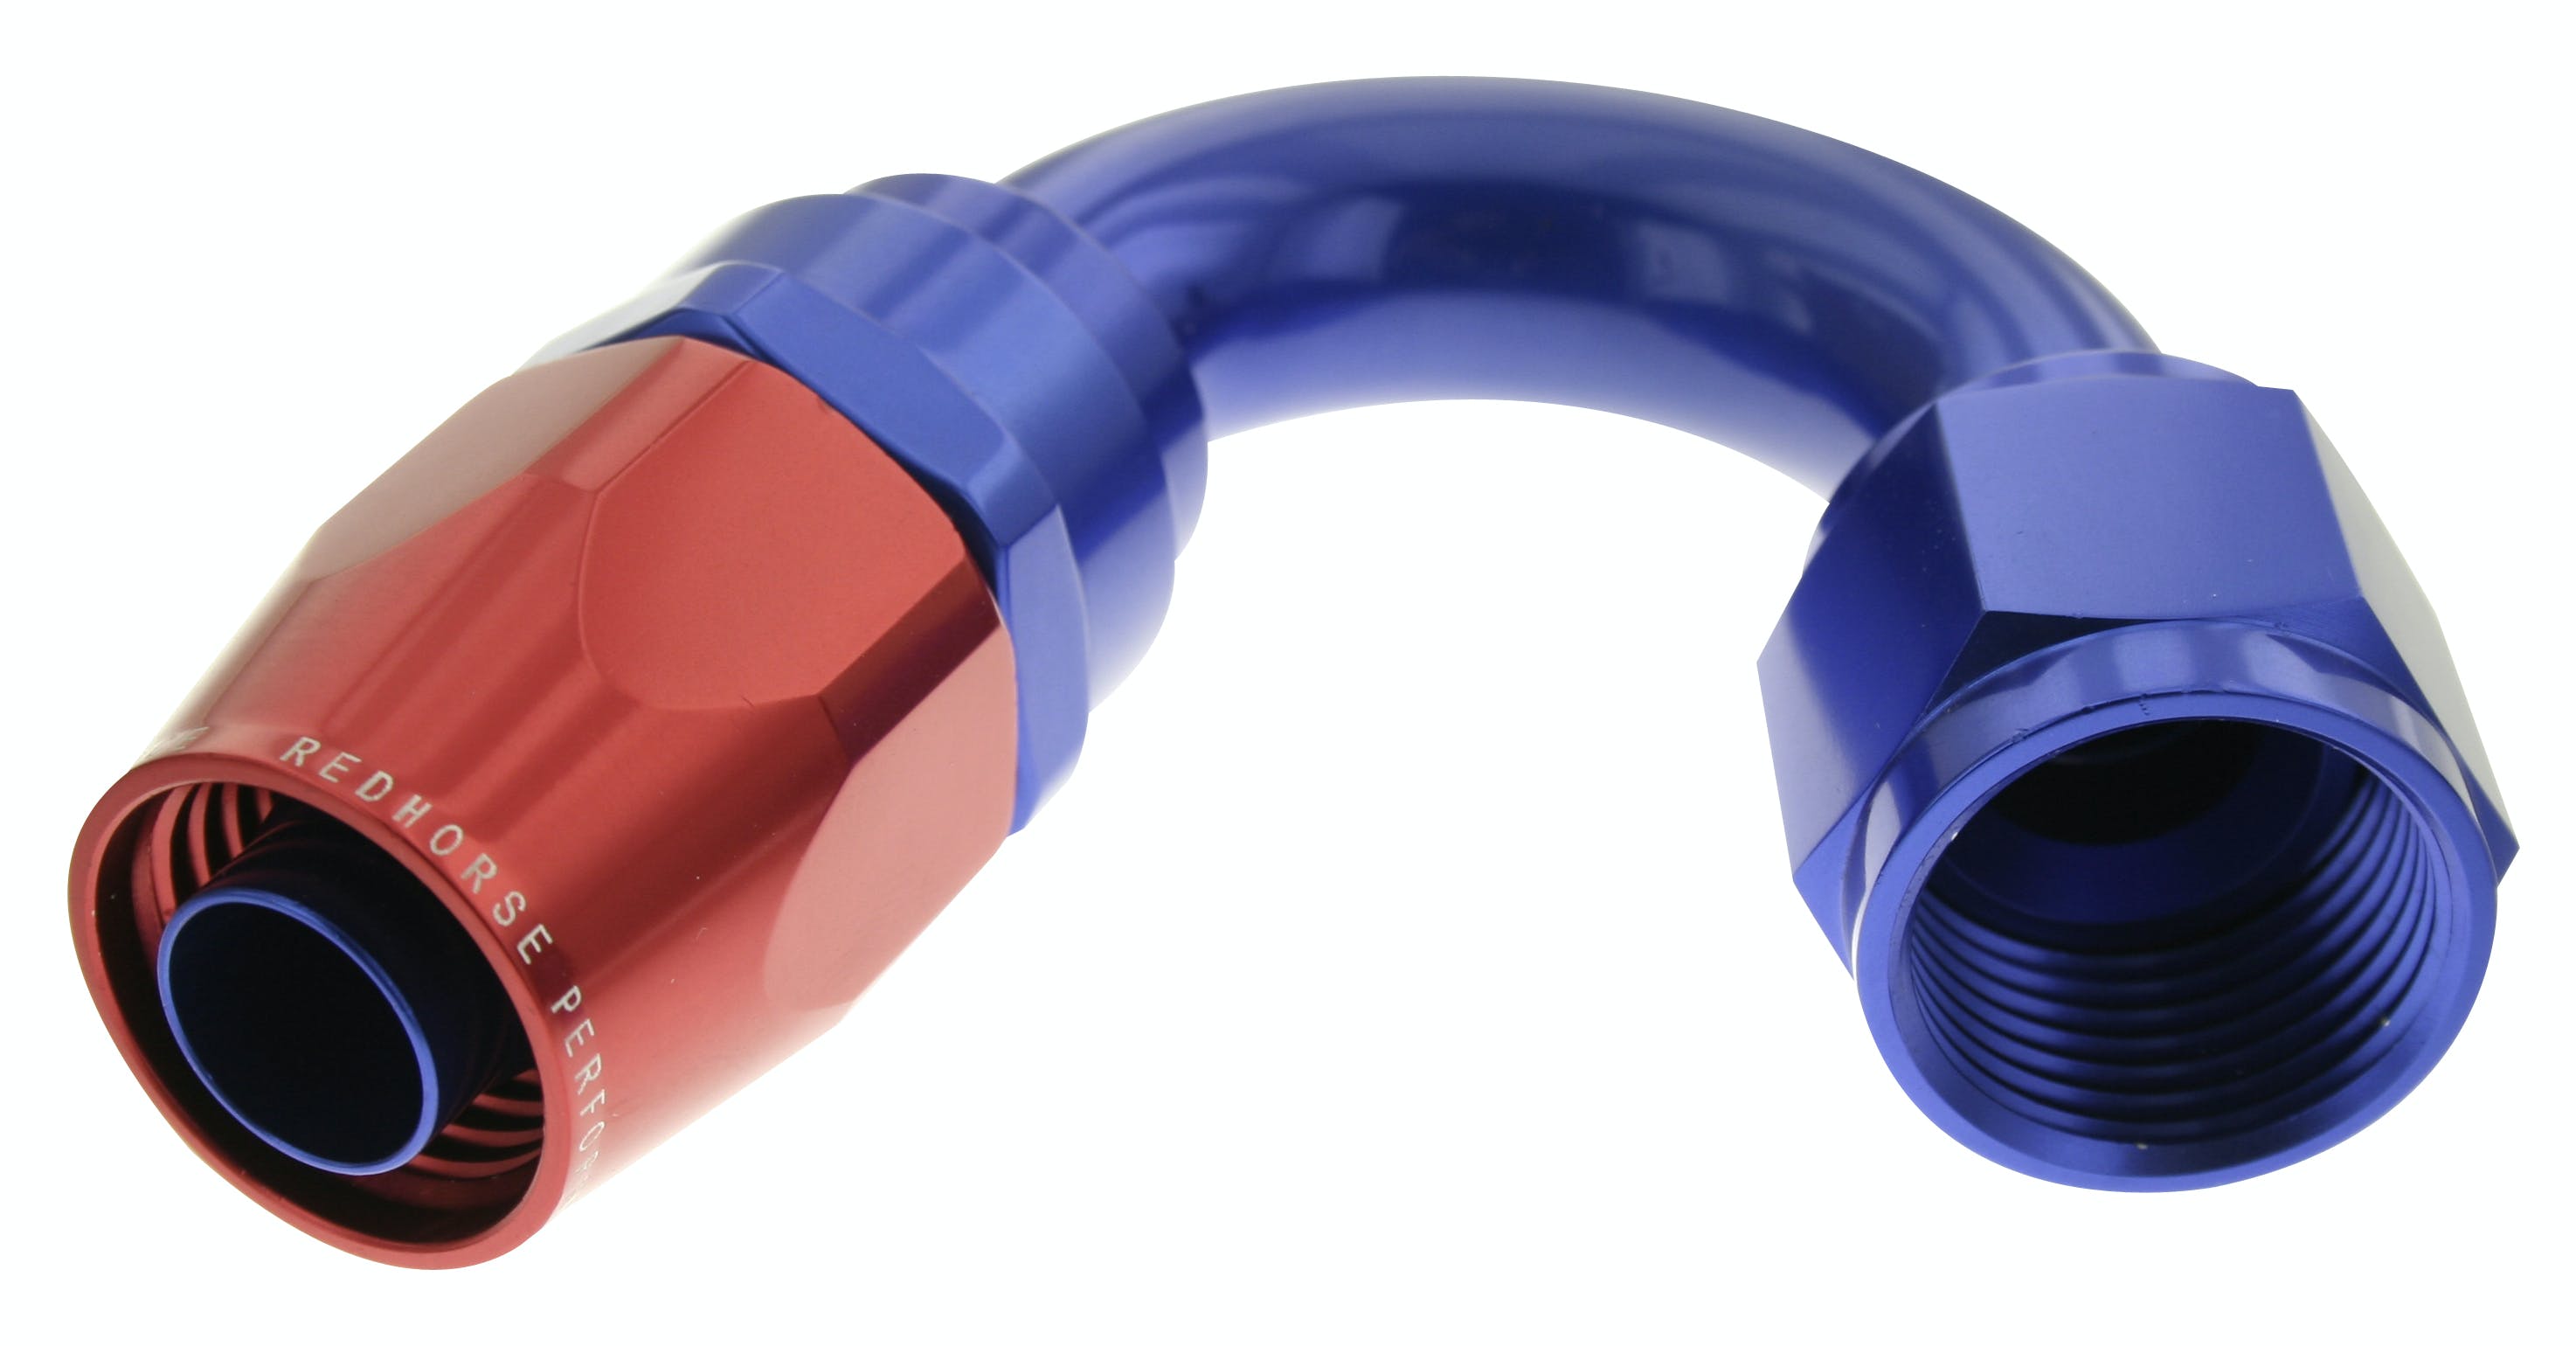 Redhorse Performance 1150-16-1 -16 150 degree Female Aluminum Hose End - red and blue